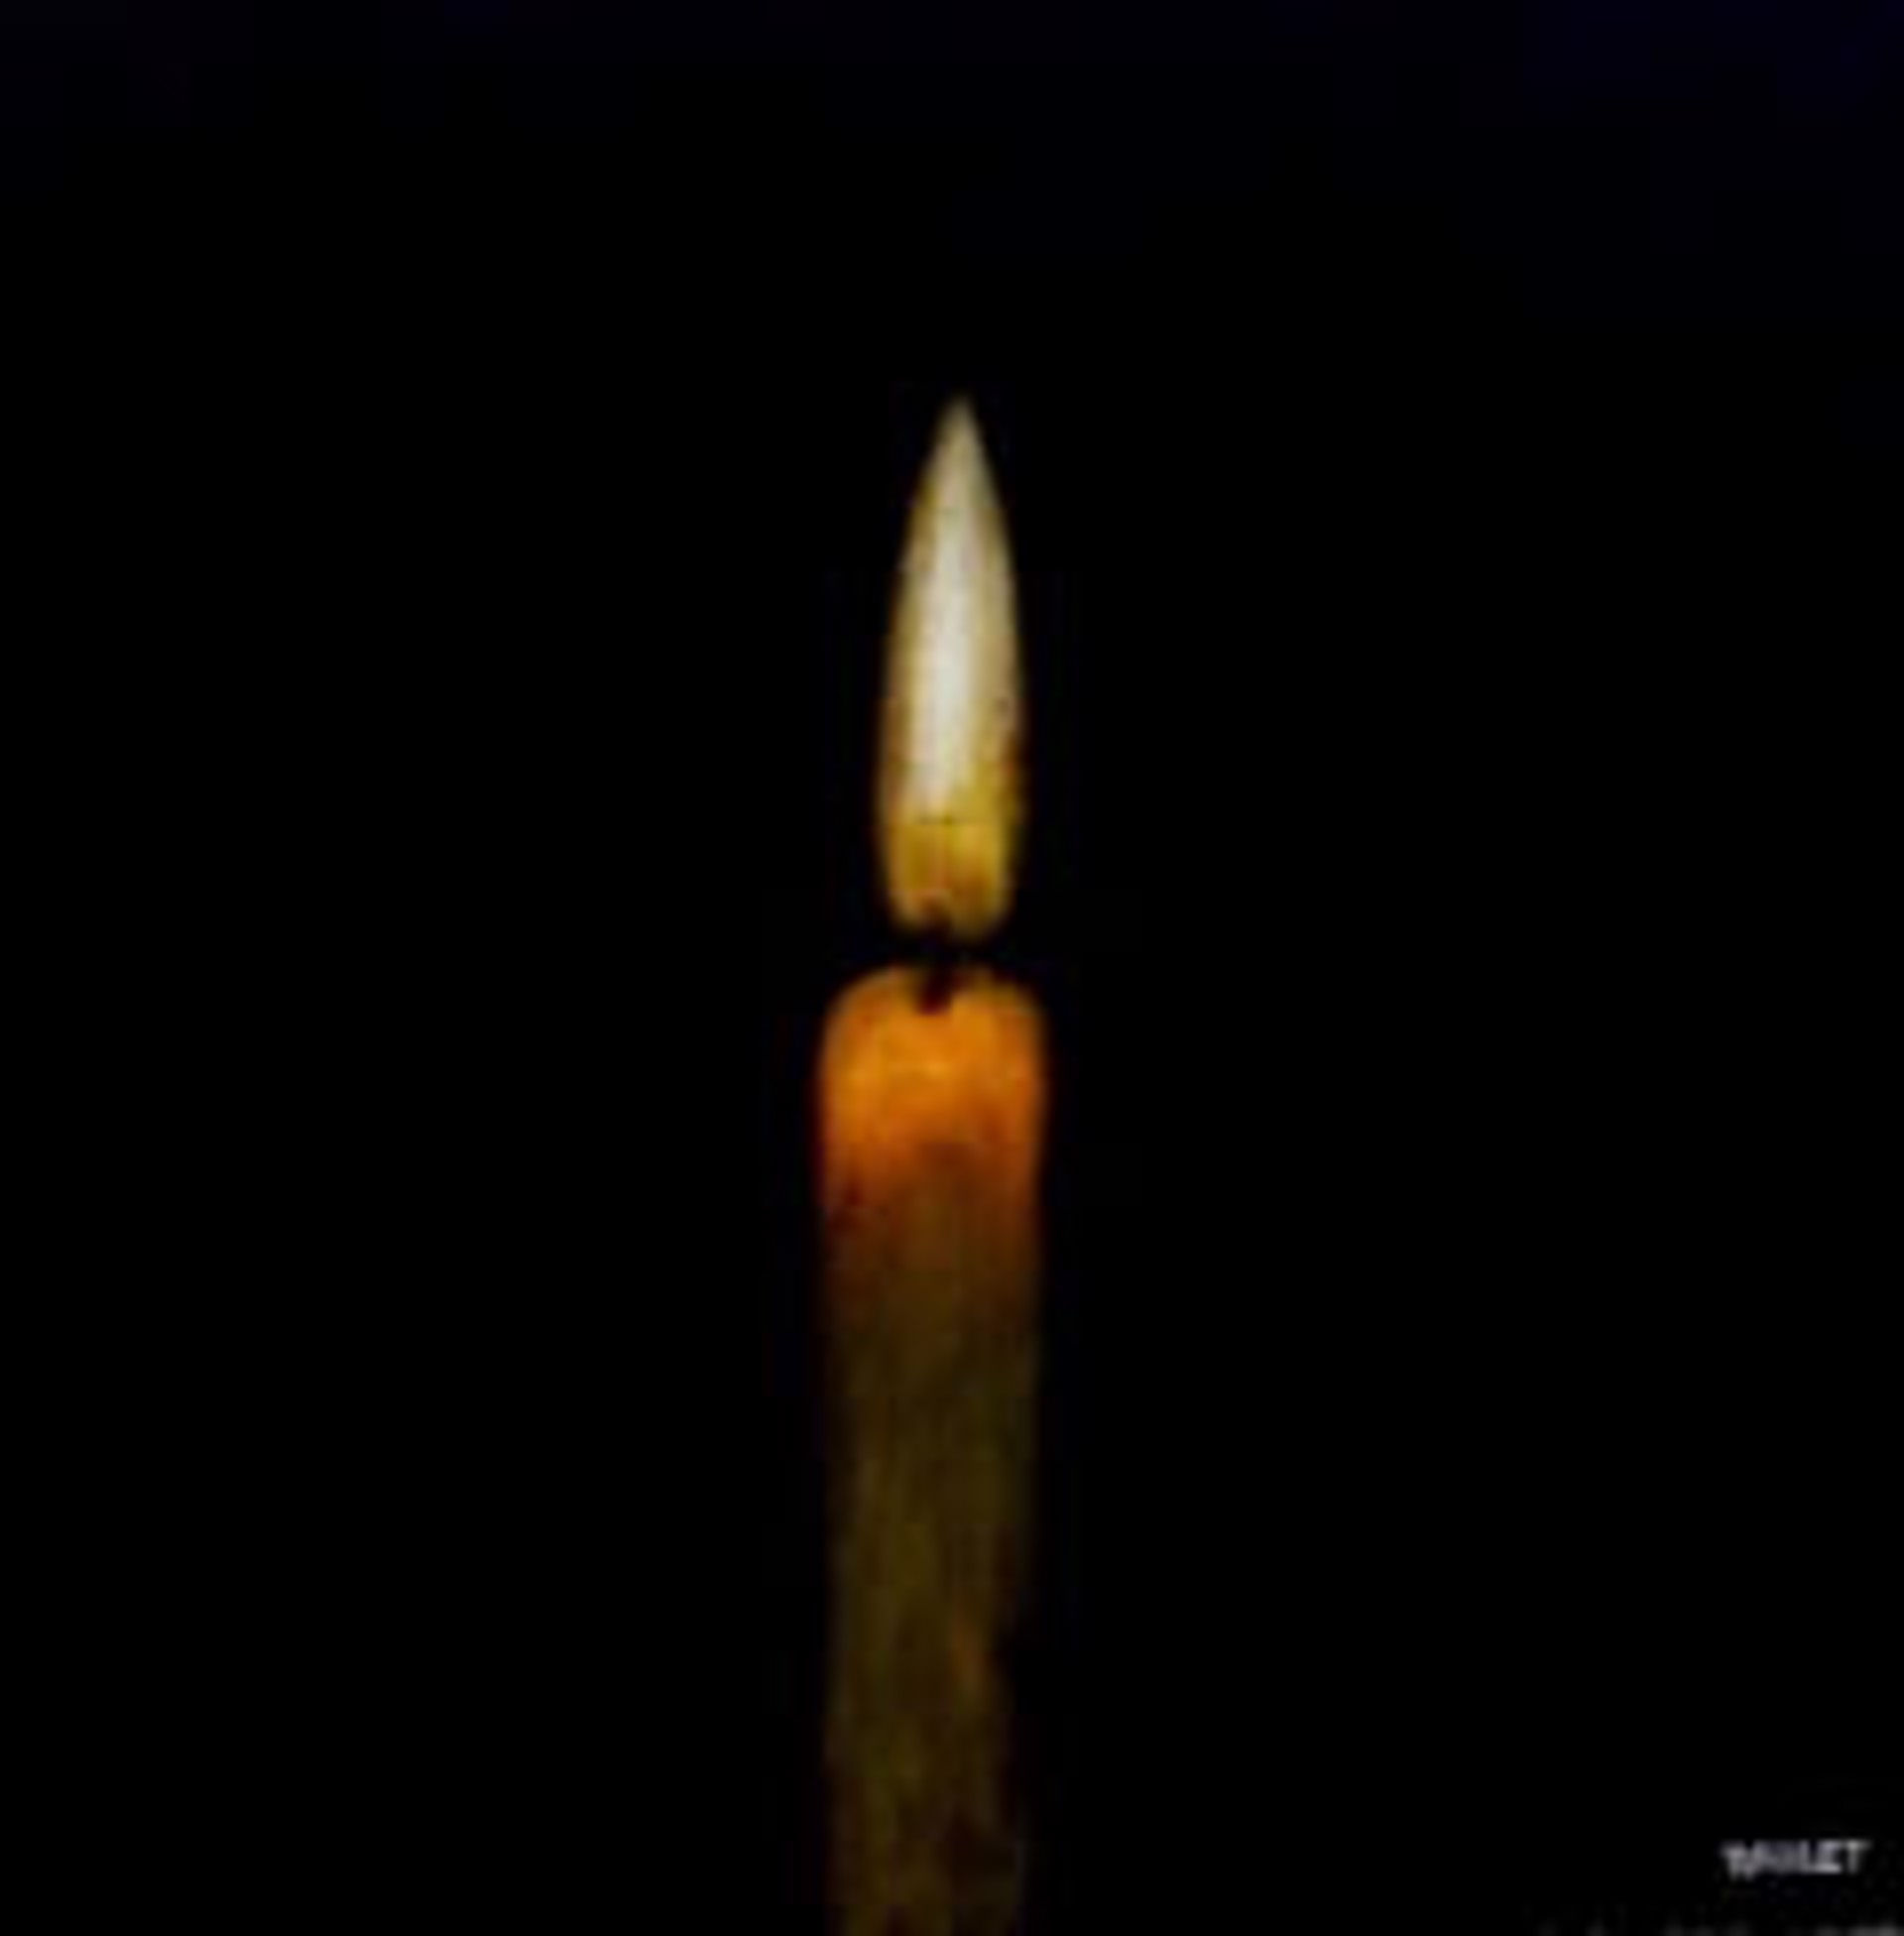 Candlelight by Dawne Raulet